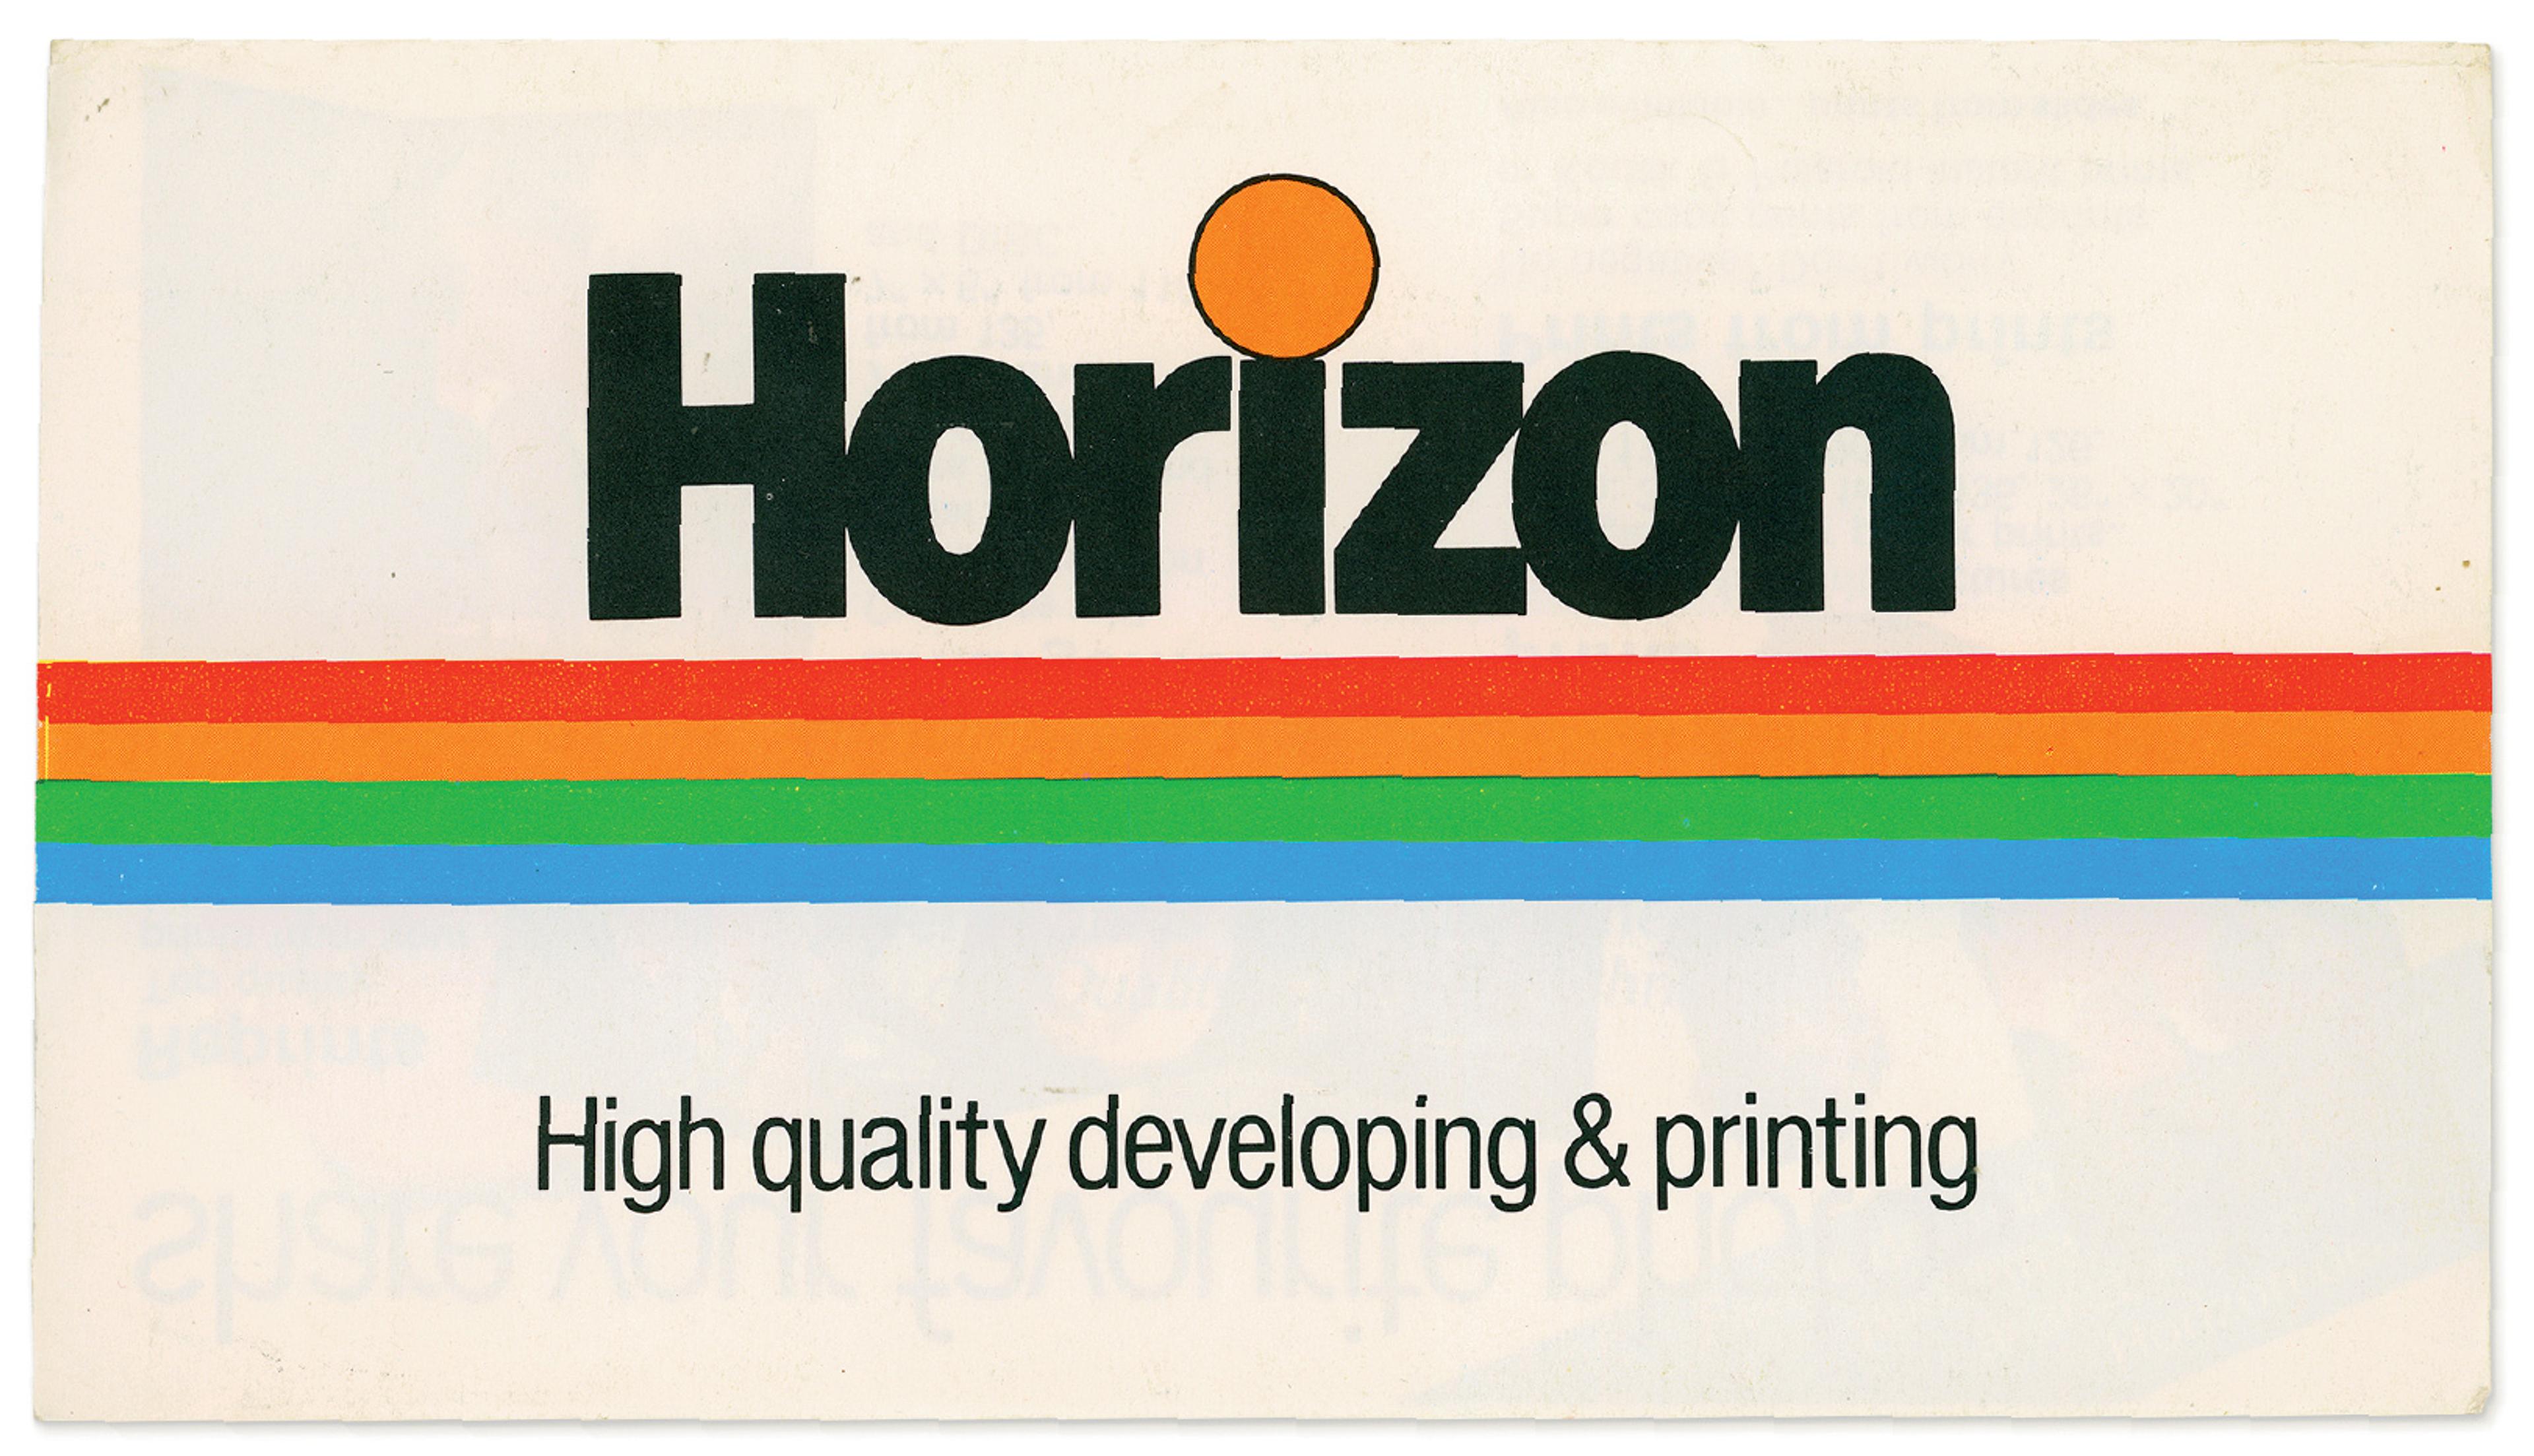 Photograph of an white envelope with colourful stripes running horizontally across the envelope, with the 'Horizon' logo and the text 'High quality developing & printing'.